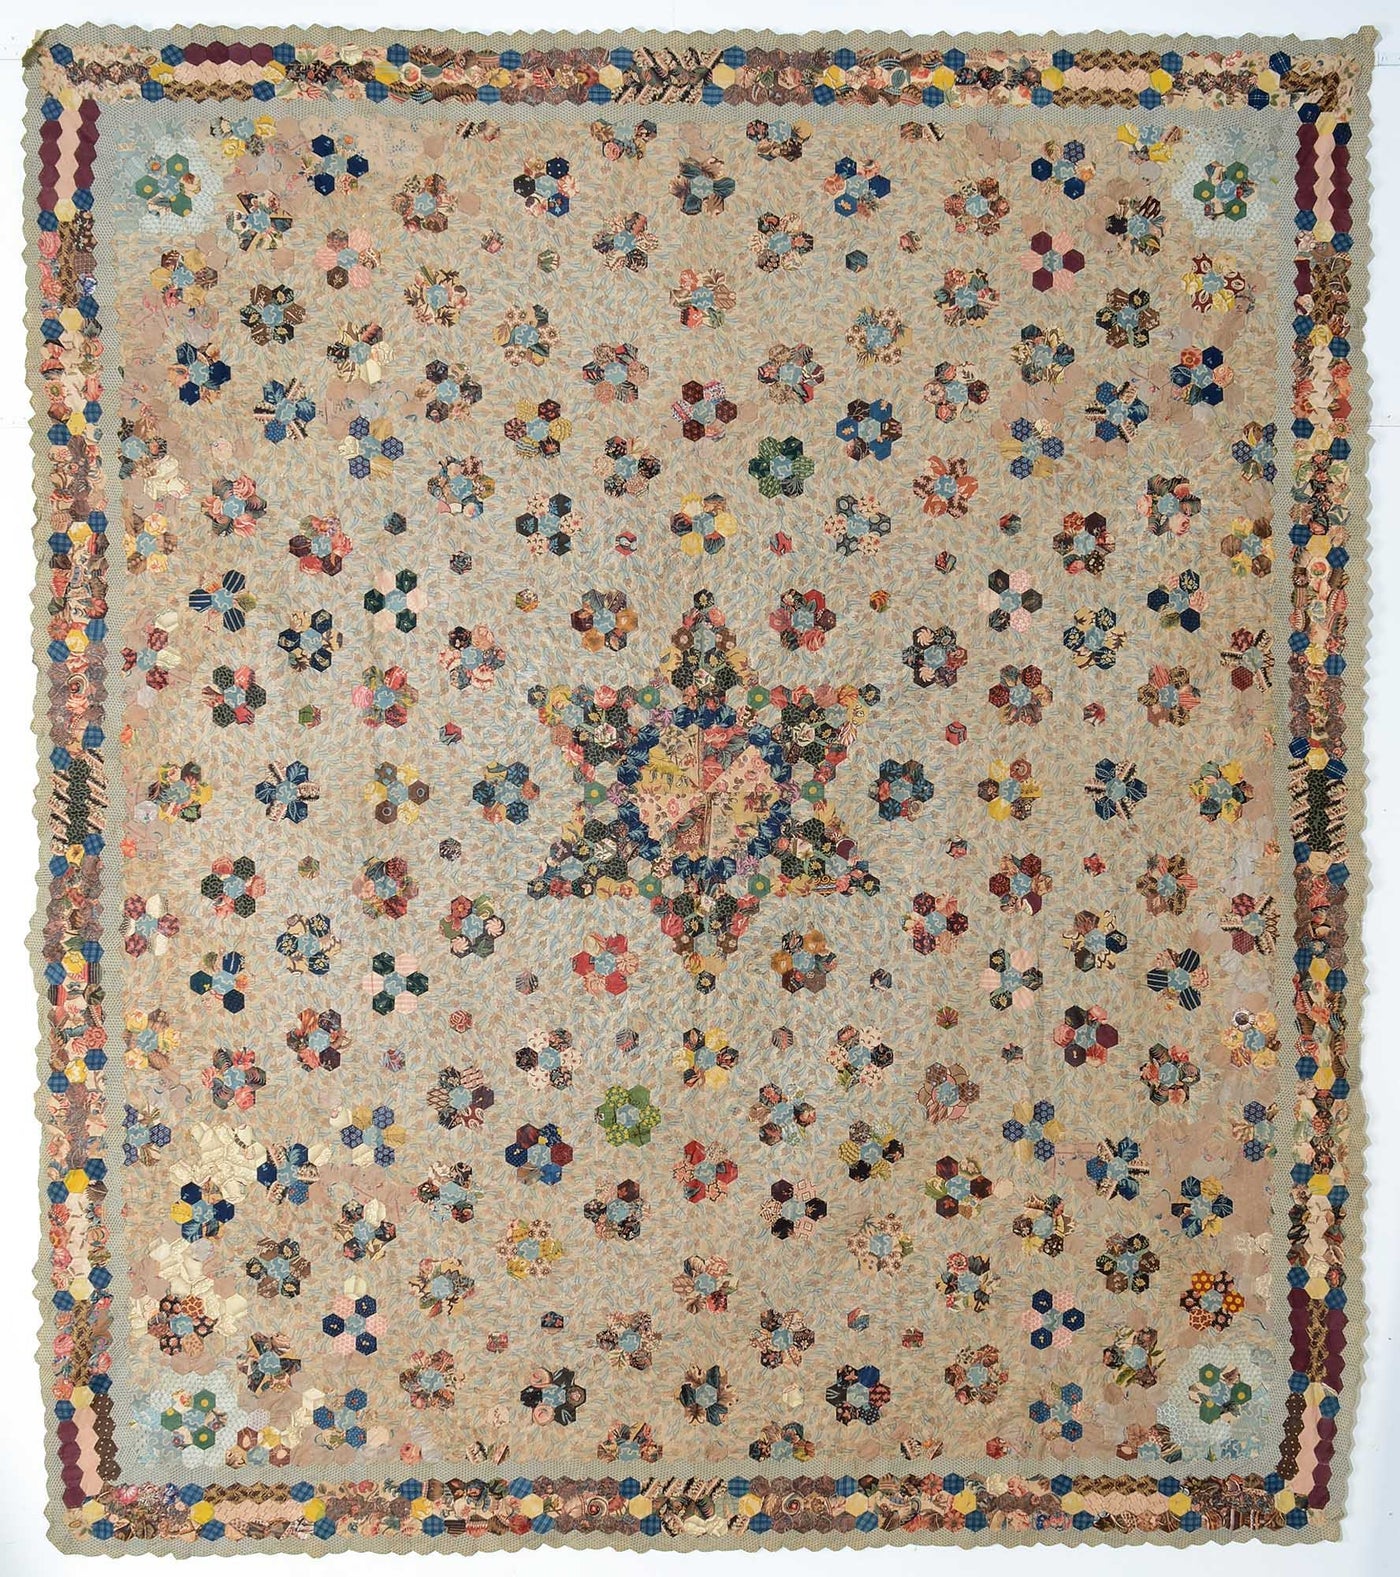 early-mosaic-hexagons-quilt-with-center-star-1369852